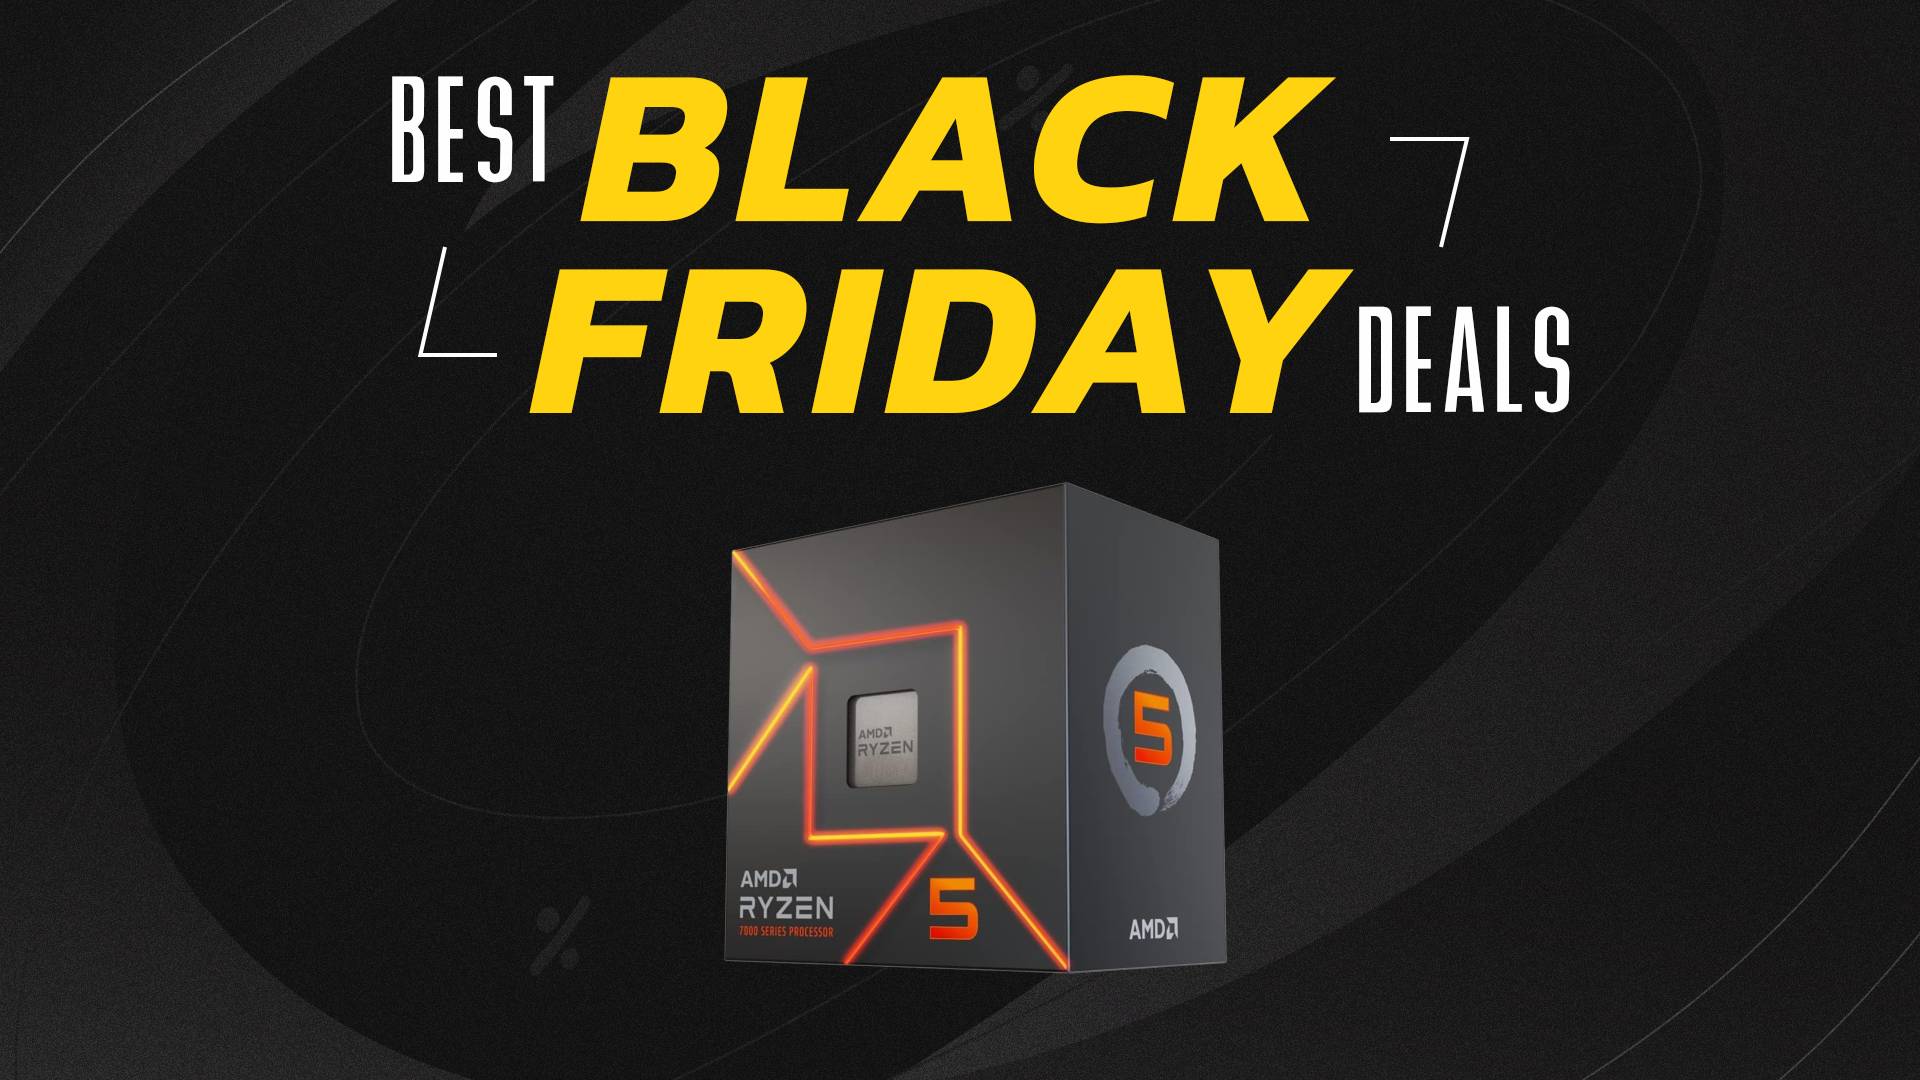 Ryzen 5 7600 plummets to lowest-ever price in early Black Friday